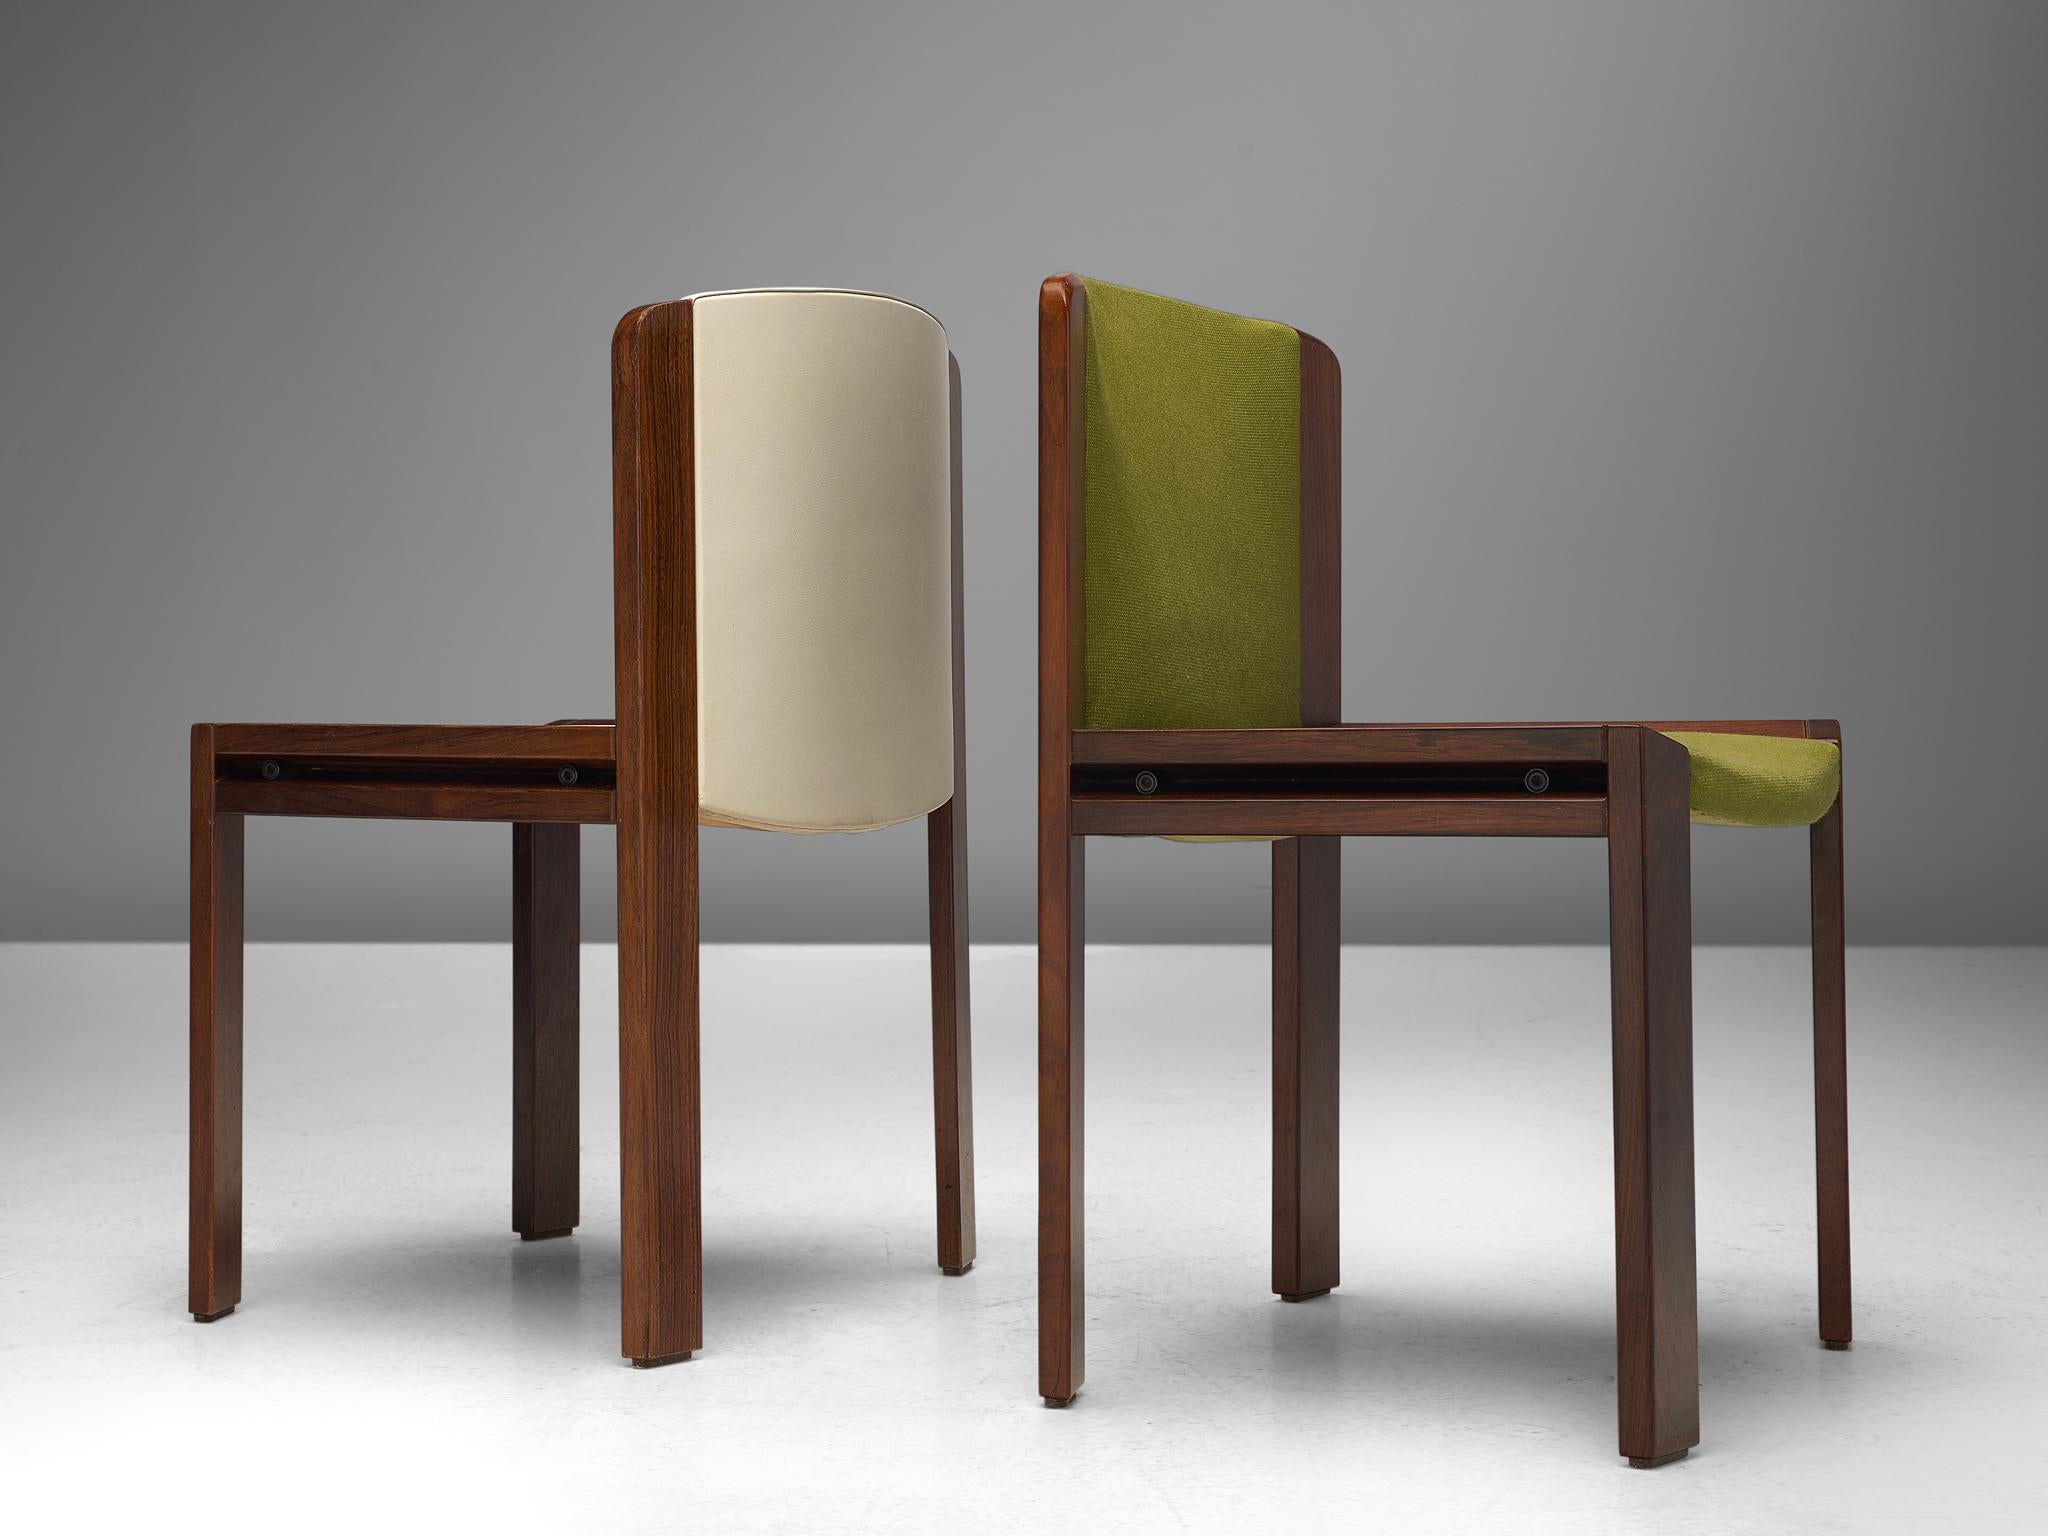 Twelve '300' Dining Chairs in White and Moss Green Upholstery by Joe Colombo 1